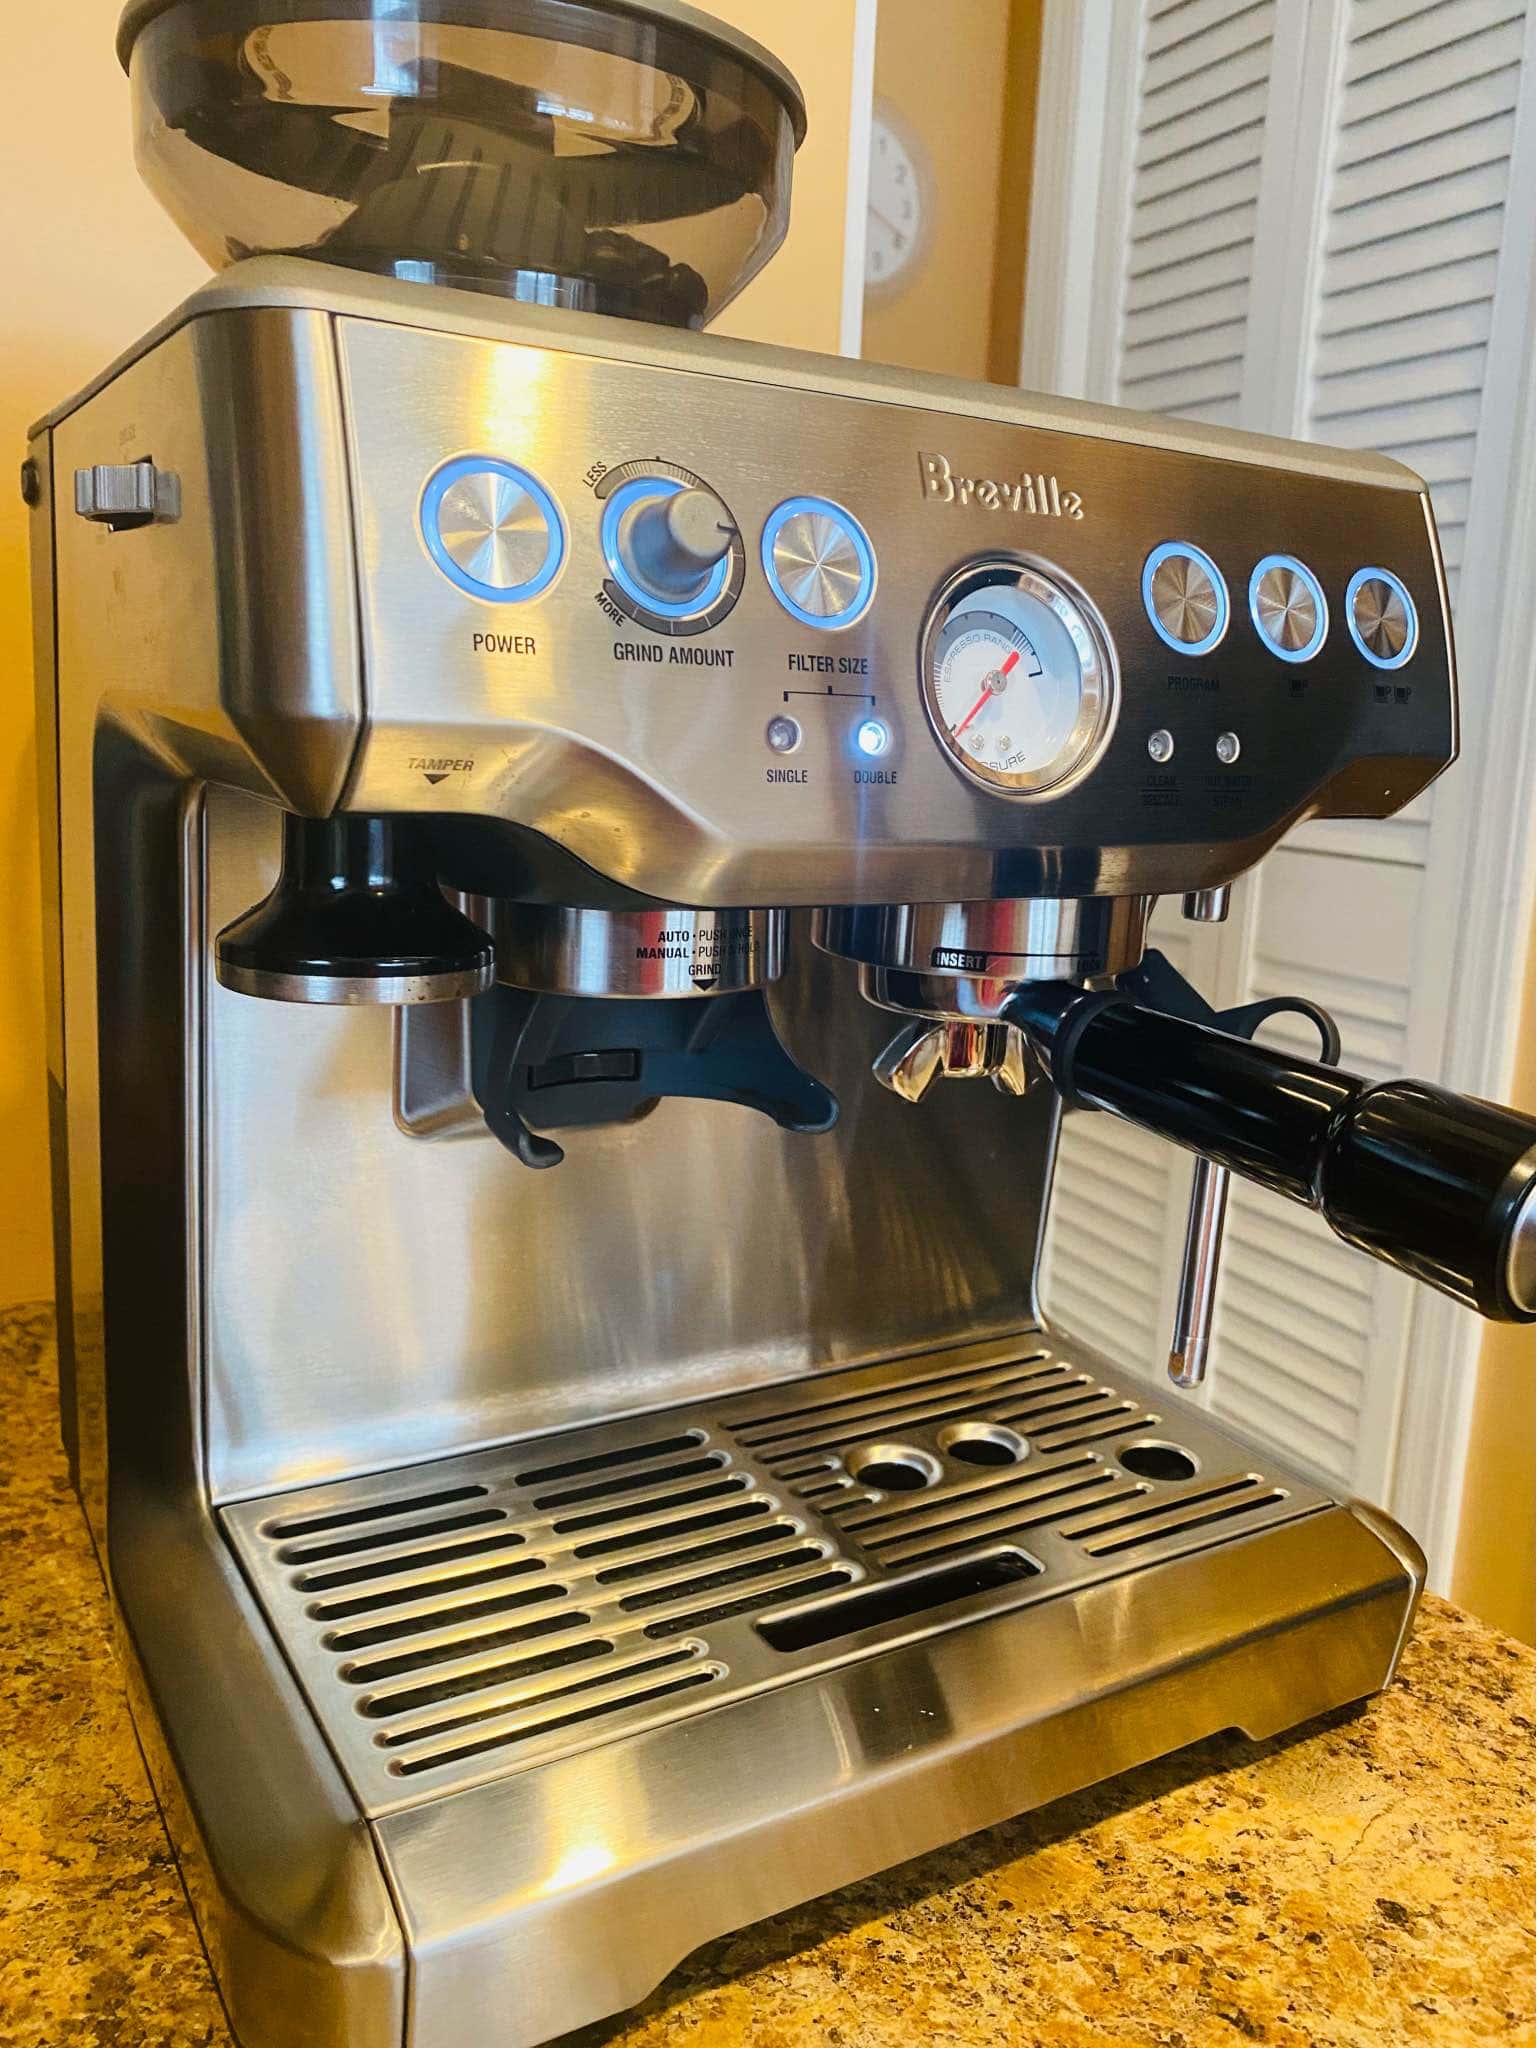 Breville Barista Express uses Thermocoil and heats water in 30s